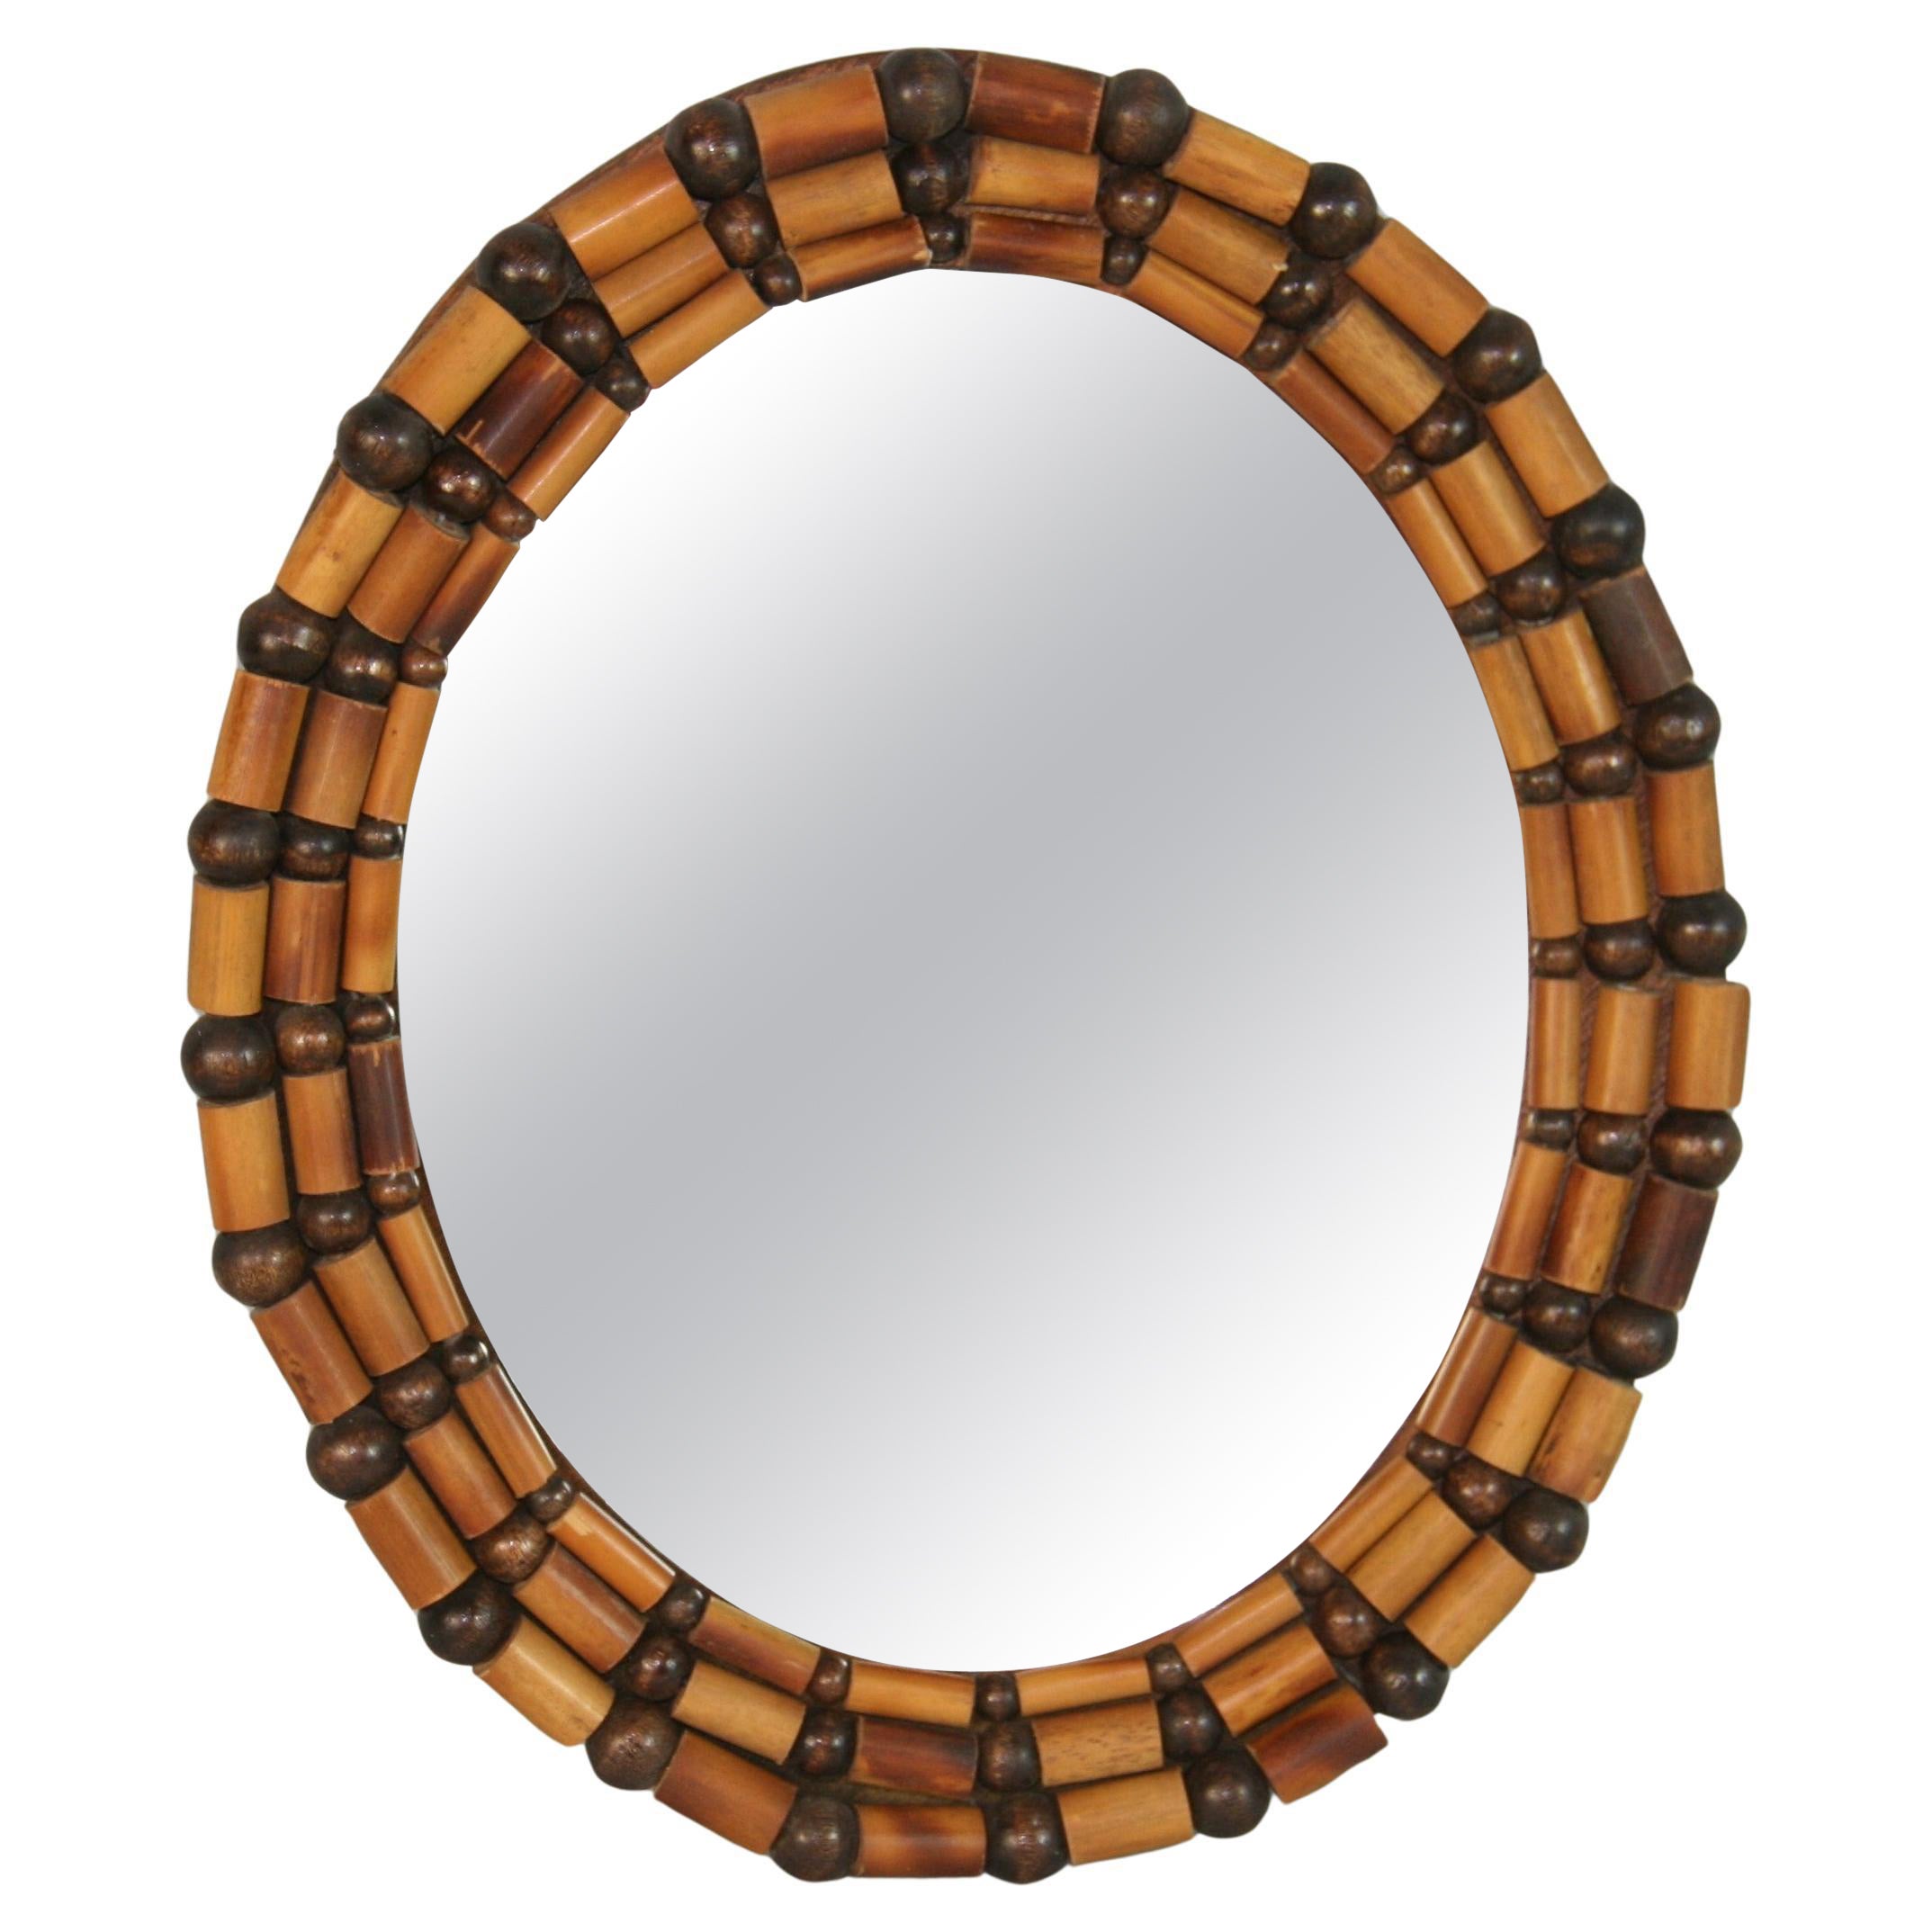 Wood Beads and Balls Small Oval Mirror For Sale